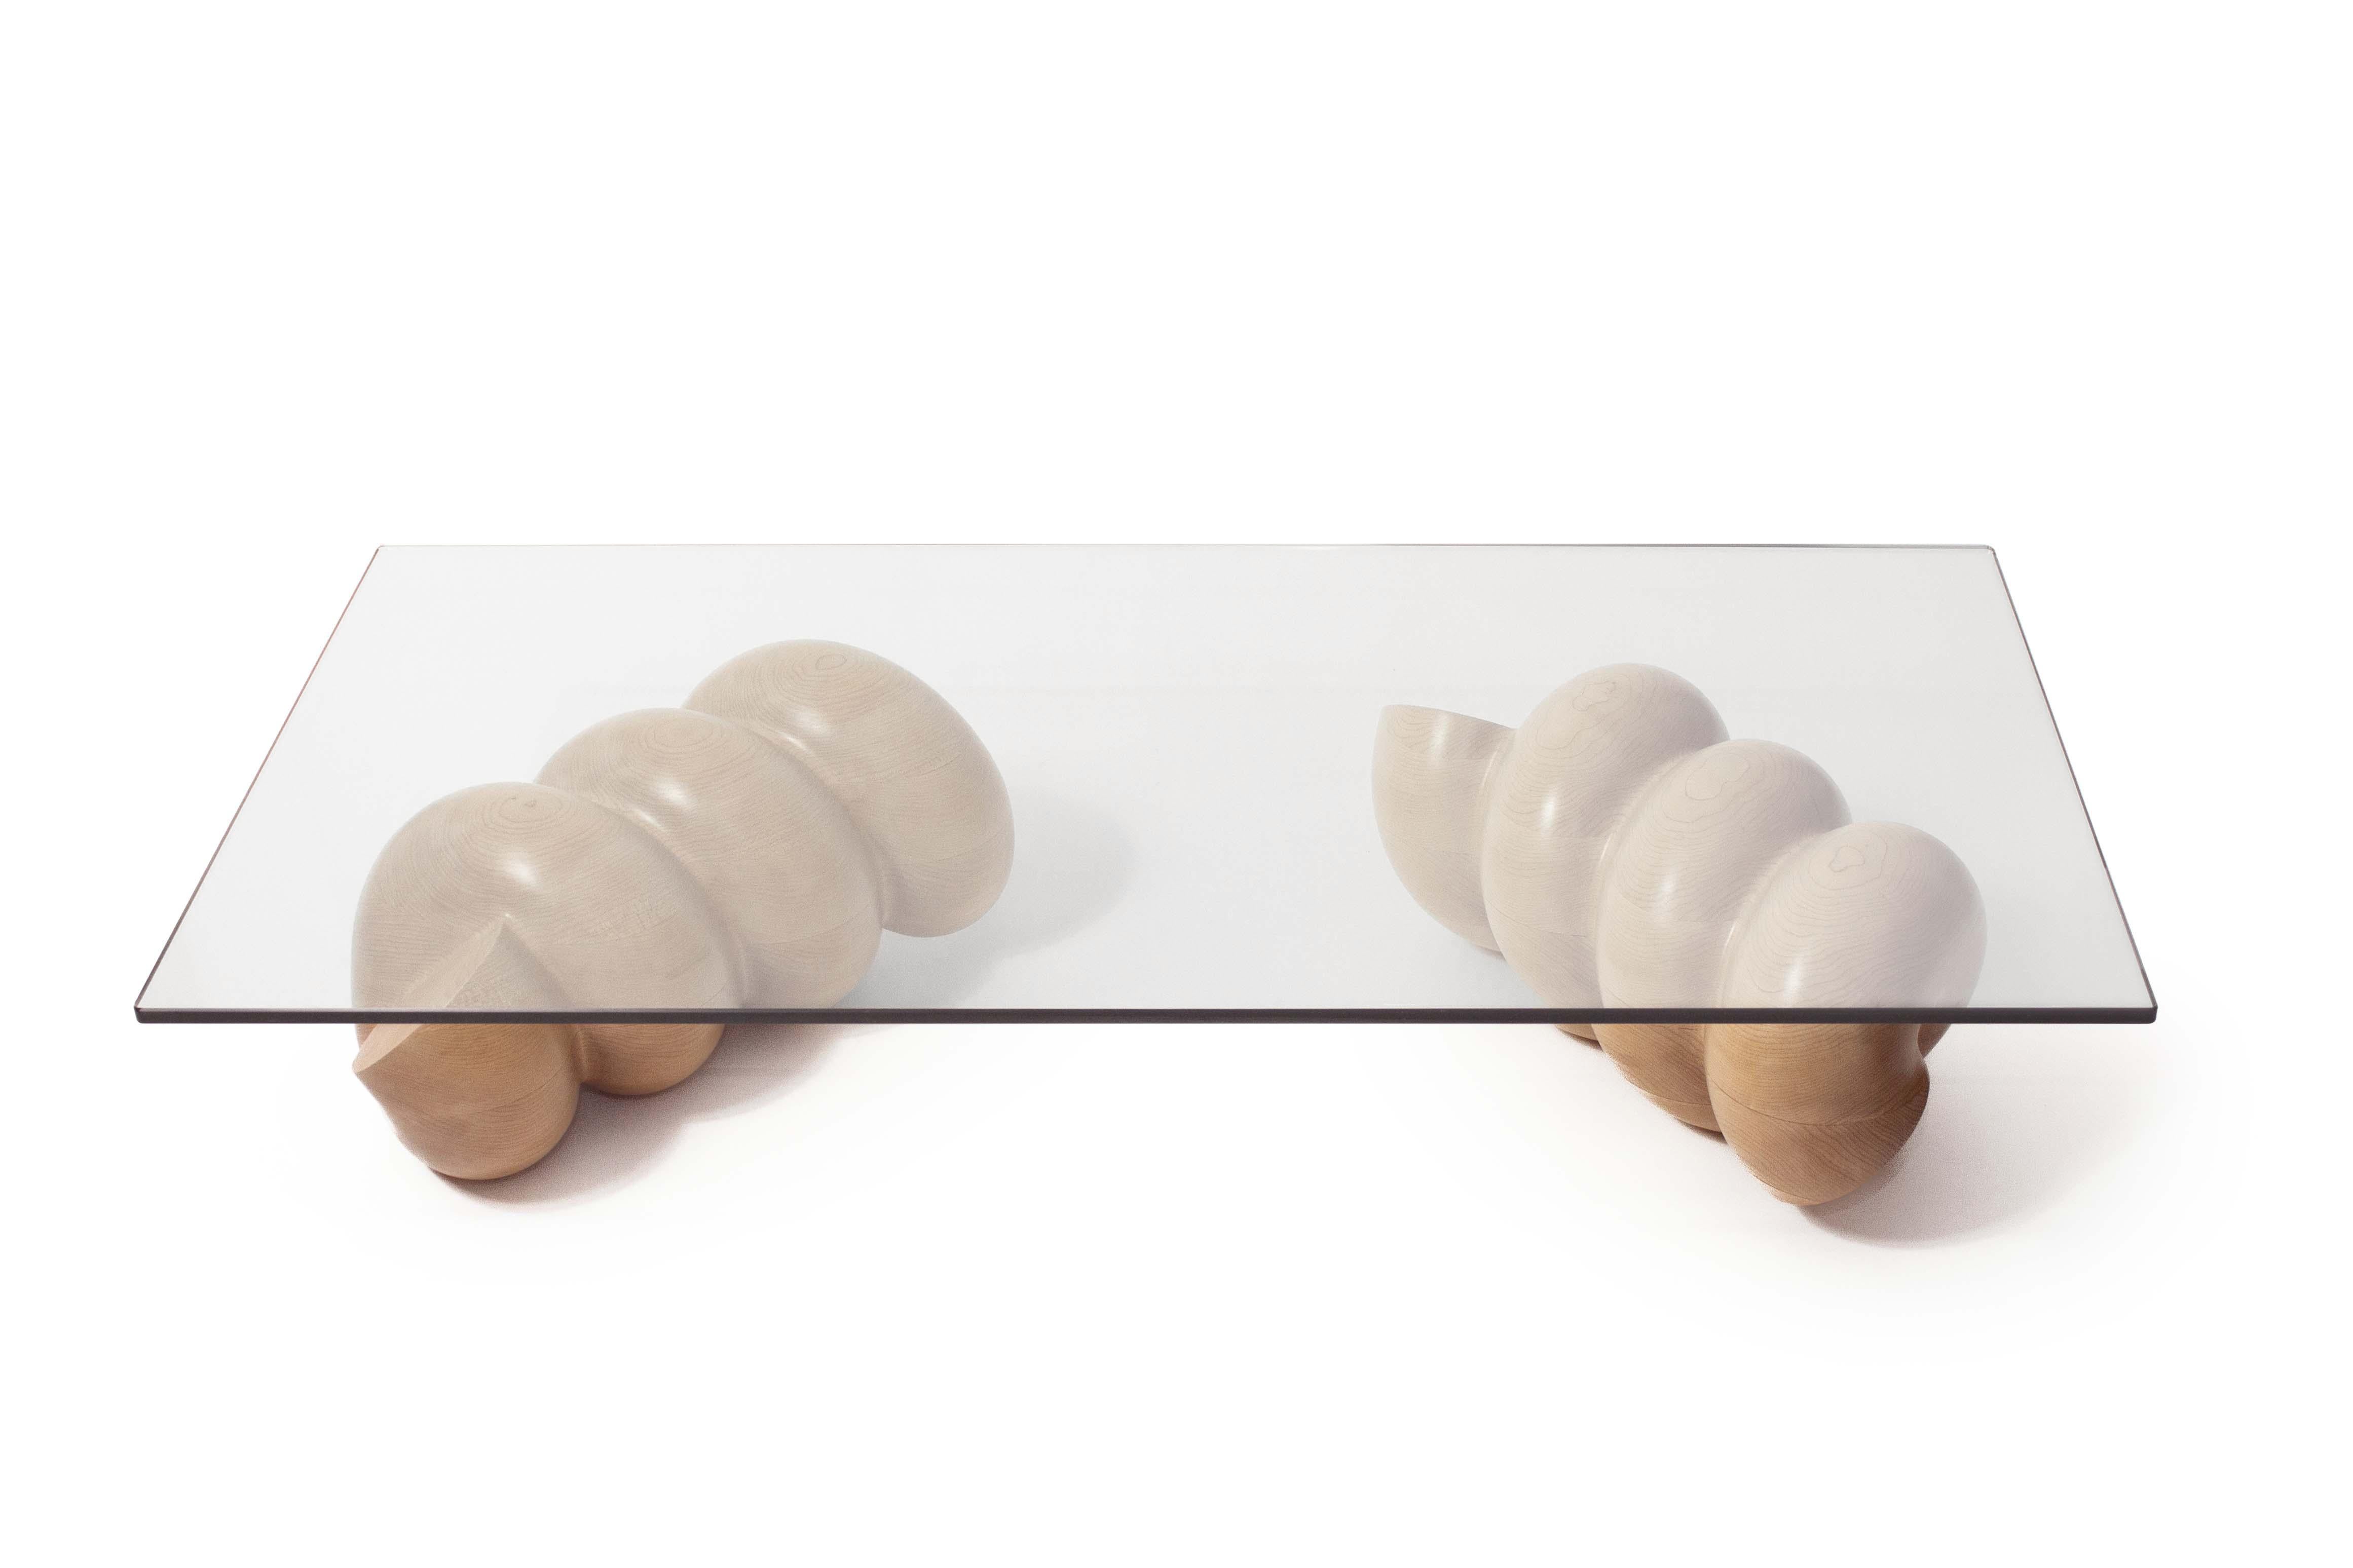 The Cavatappi coffee table is part of the Al Dente collection by furniture designer and artist, Caleb Ferris. Its whimsical base recalls the shape of pasta, while the material choices keep it firmly grounded and sophisticated. 

The coffee table